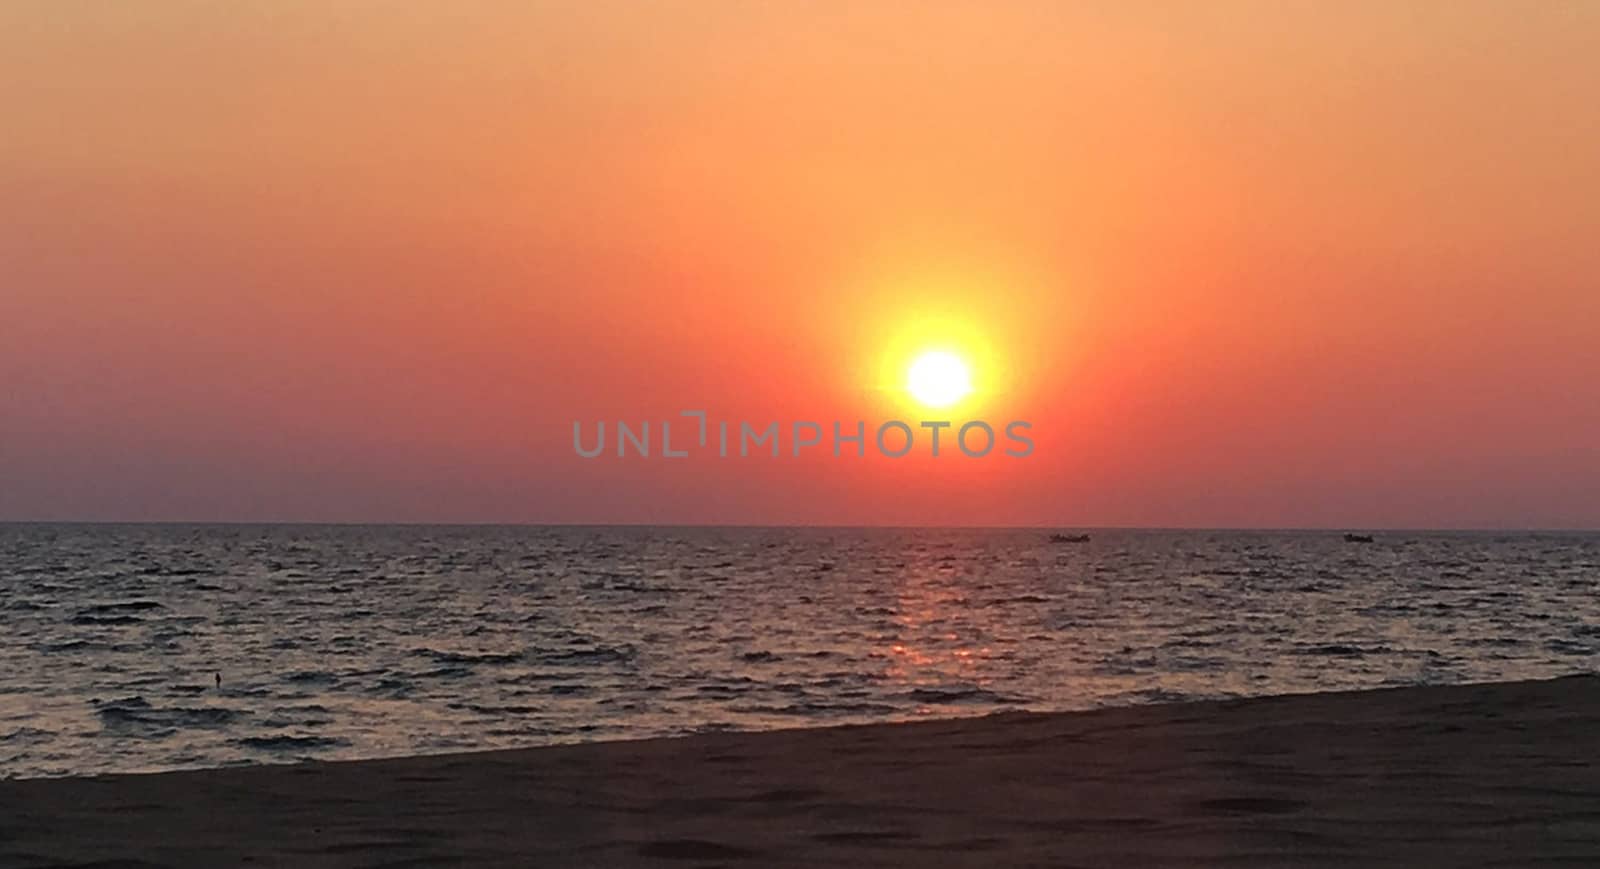 Beautiful pictures of Malawi